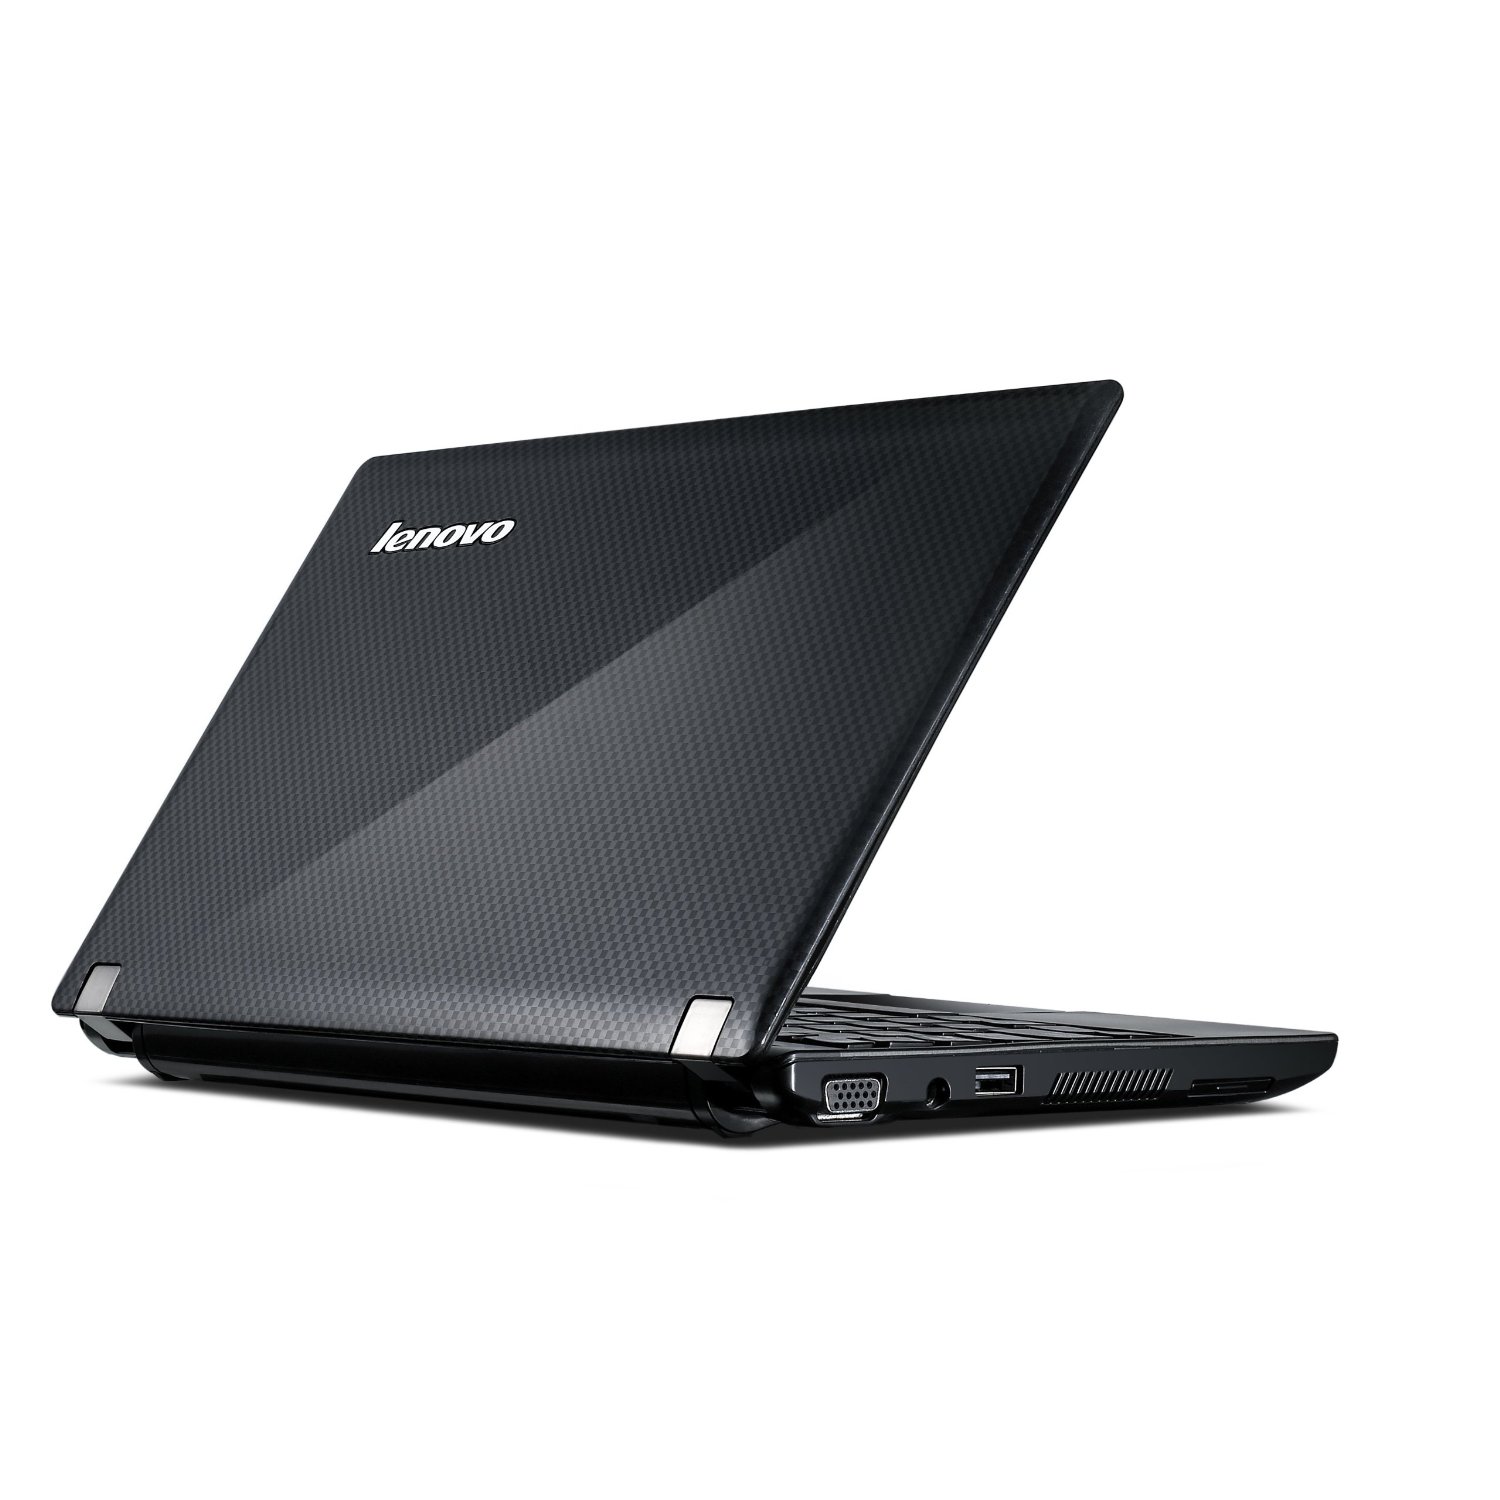 http://thetechjournal.com/wp-content/uploads/images/1112/1322935275-lenovo-ideapad-s103-06472au-101inch-netbook-7.jpg